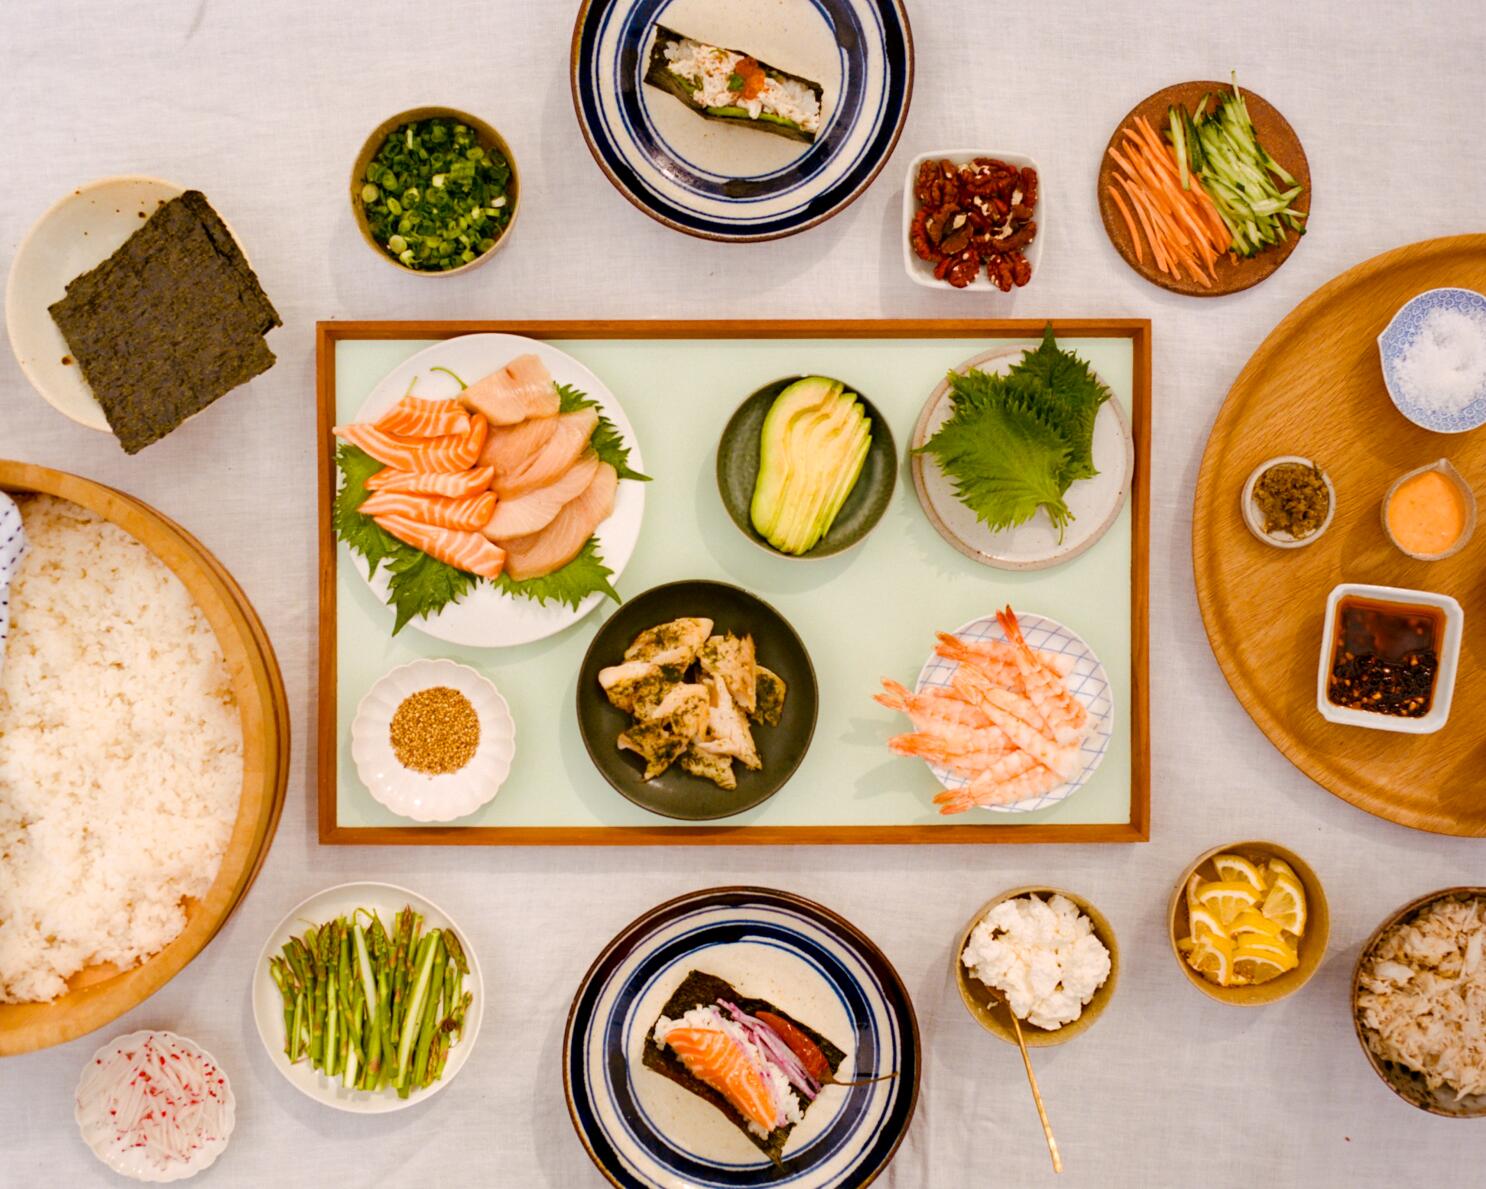 We've Been Eating Sushi Wrong Our Whole Lives According To This Hack